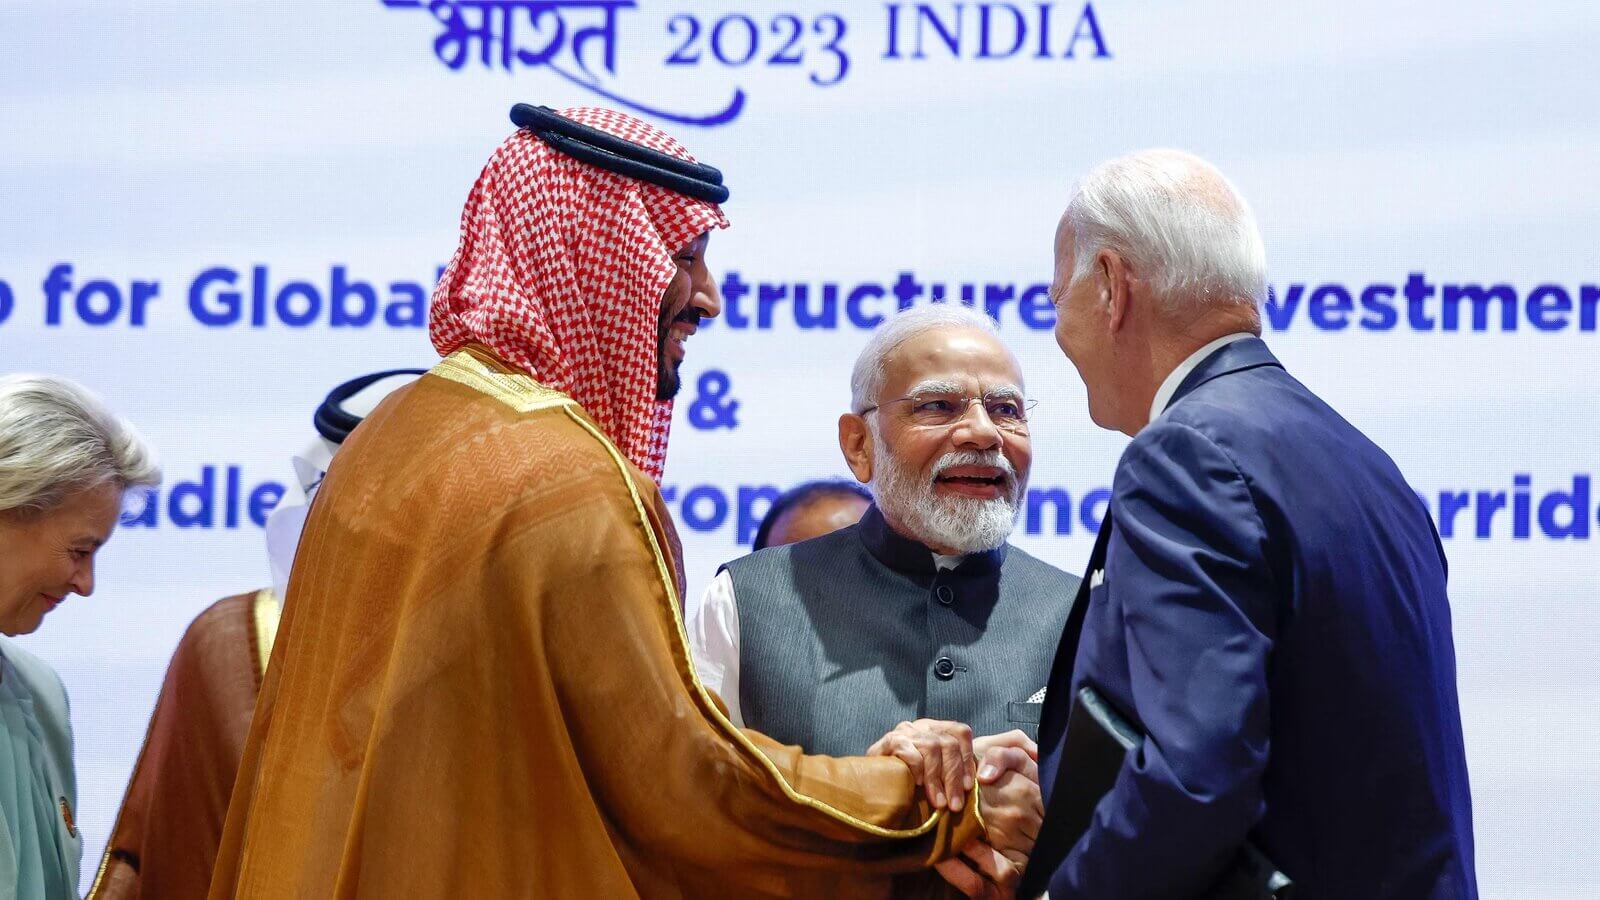 What is The India-Middle East-Europe Economic Corridor Launched at G20 Summit?